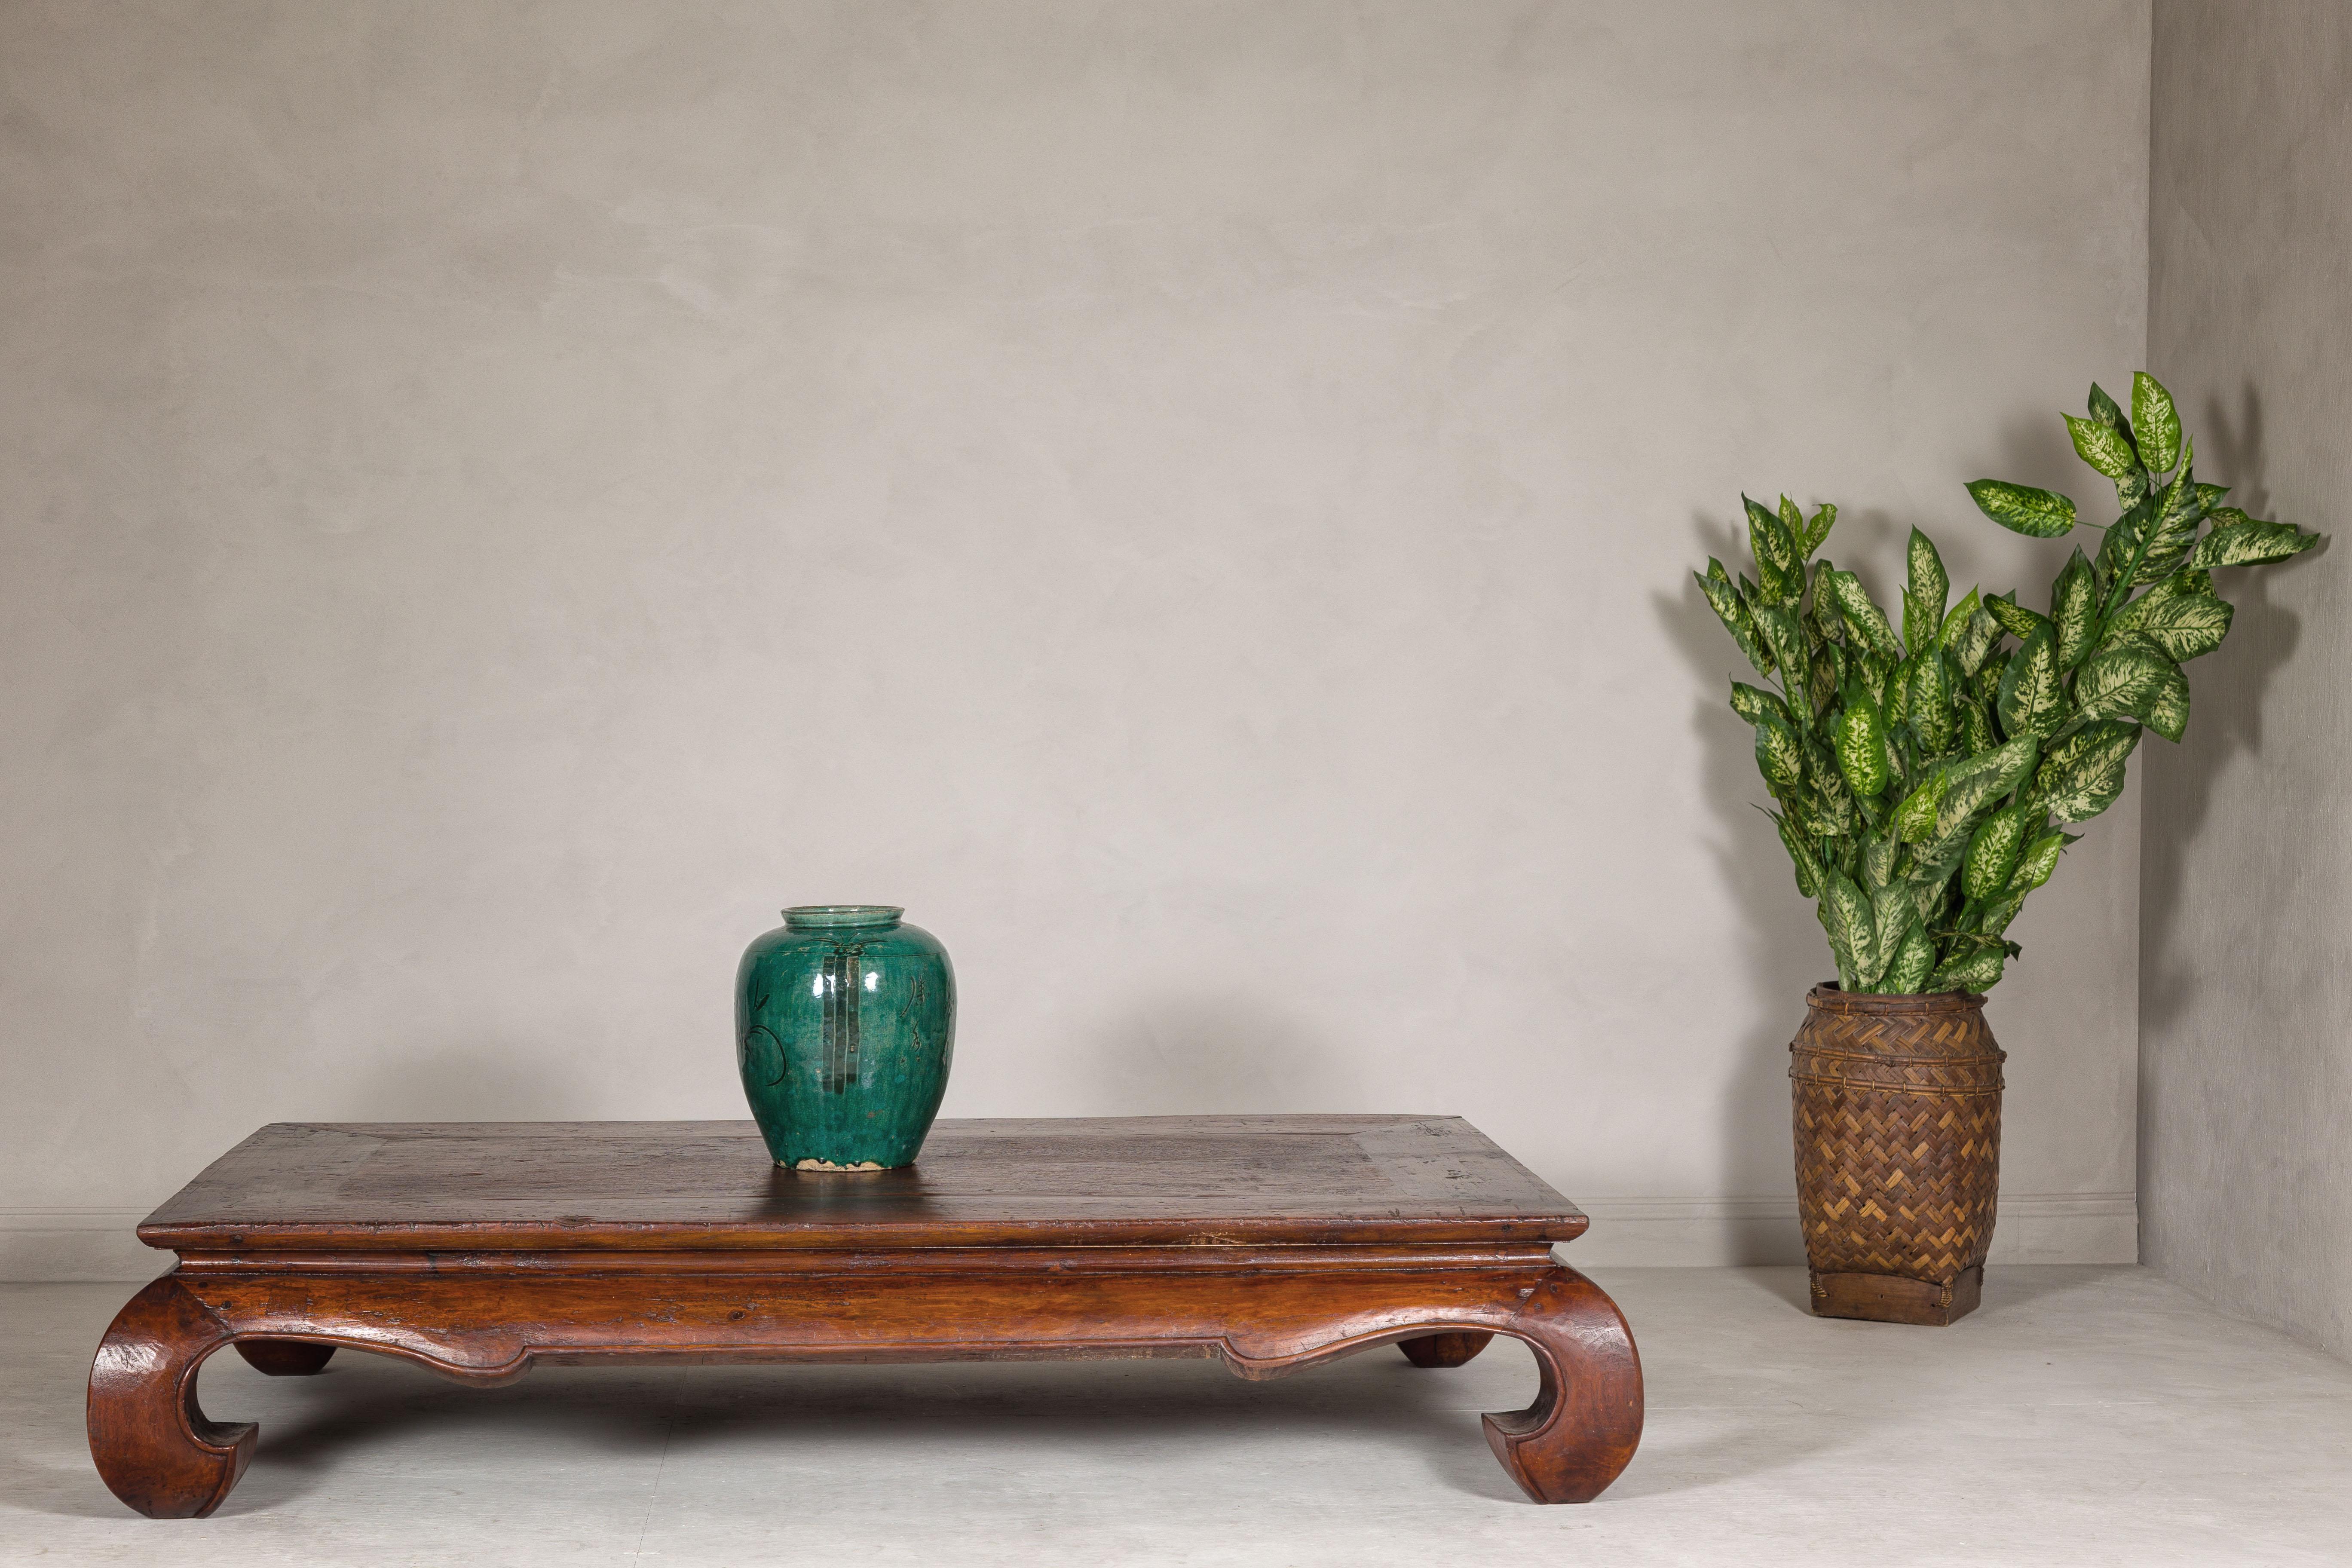 A Qing Dynasty period low Kang coffee table from the 19th century with chow legs and weathered, rustic patina. This Qing Dynasty period low Kang table, transformed into a contemporary coffee table, bridges the past and present with its weathered and